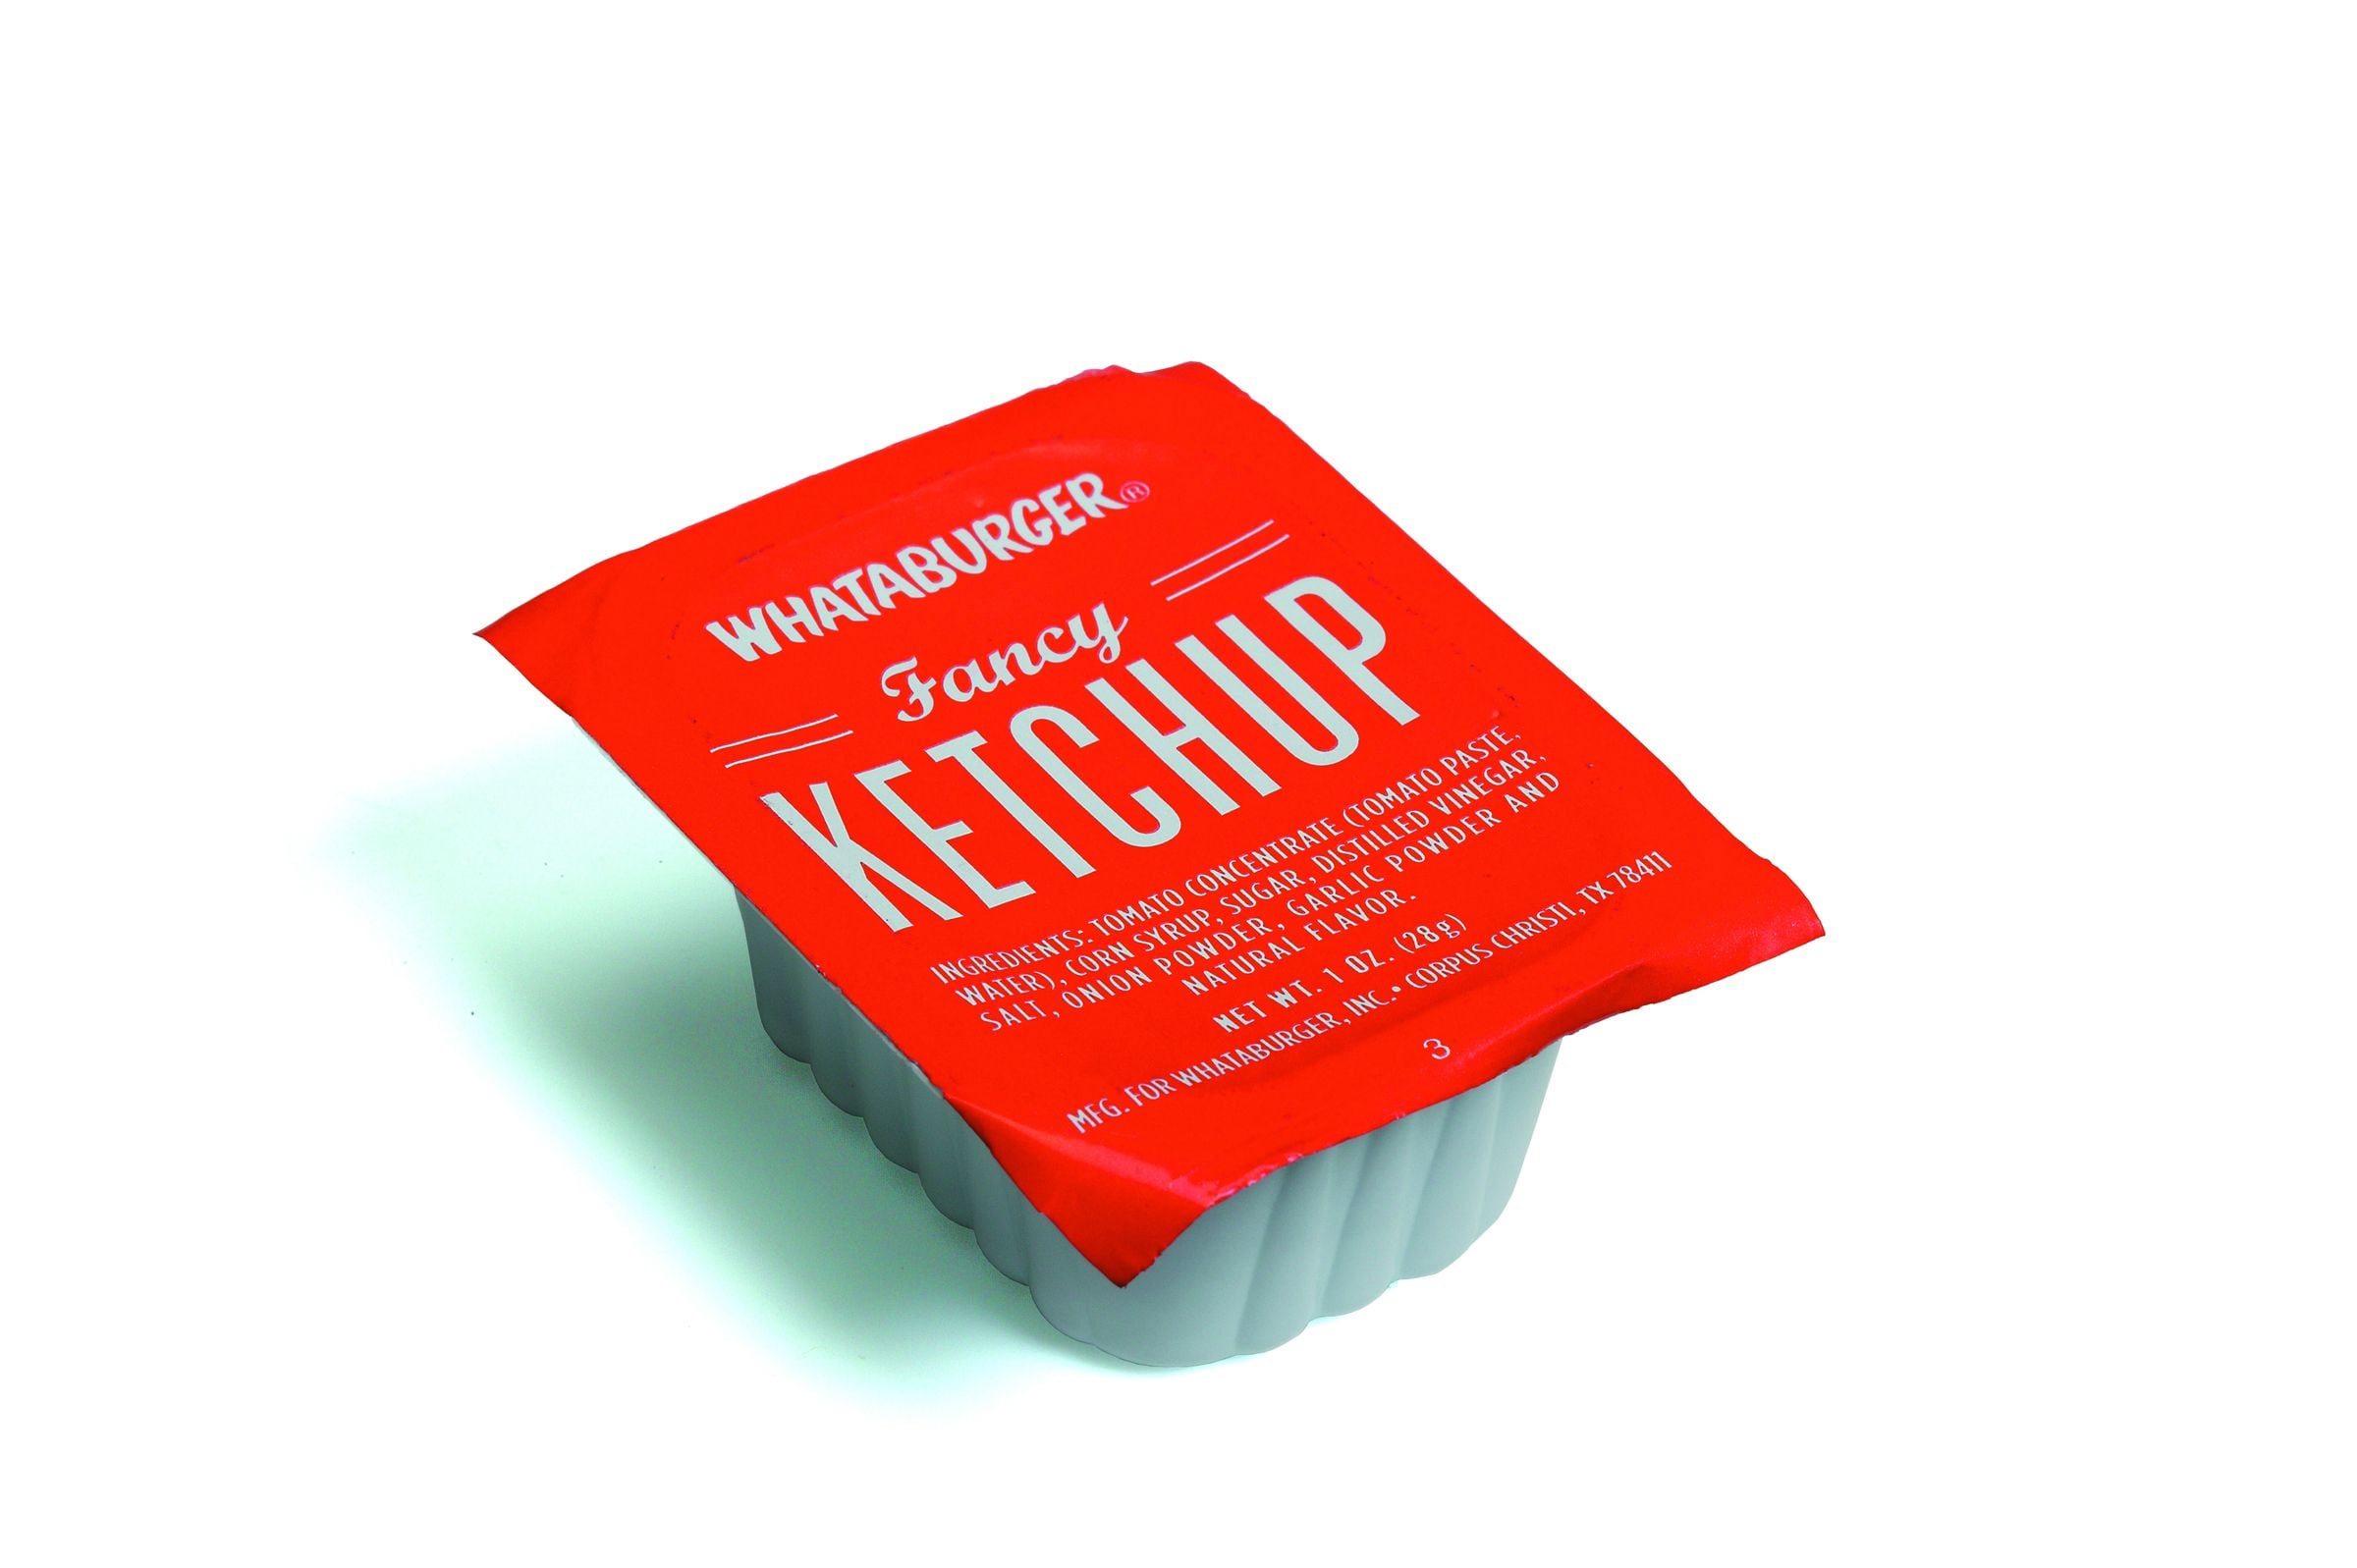 Whataburger's Fancy and Spicy Ketchup: A Review